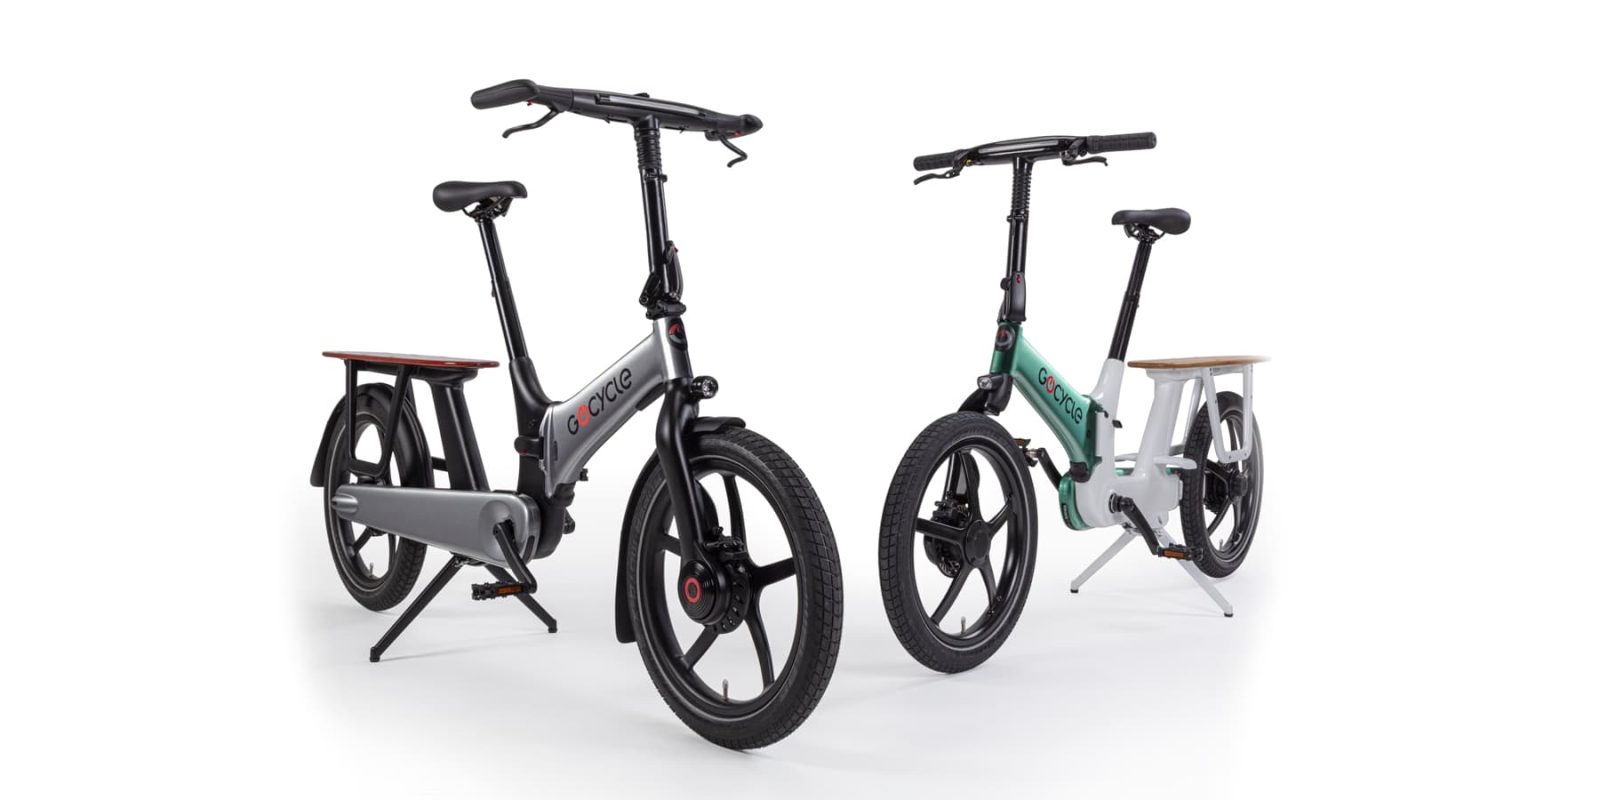 Gocycle unveils new images of its premium, lightweight belt-drive cargo electric bike